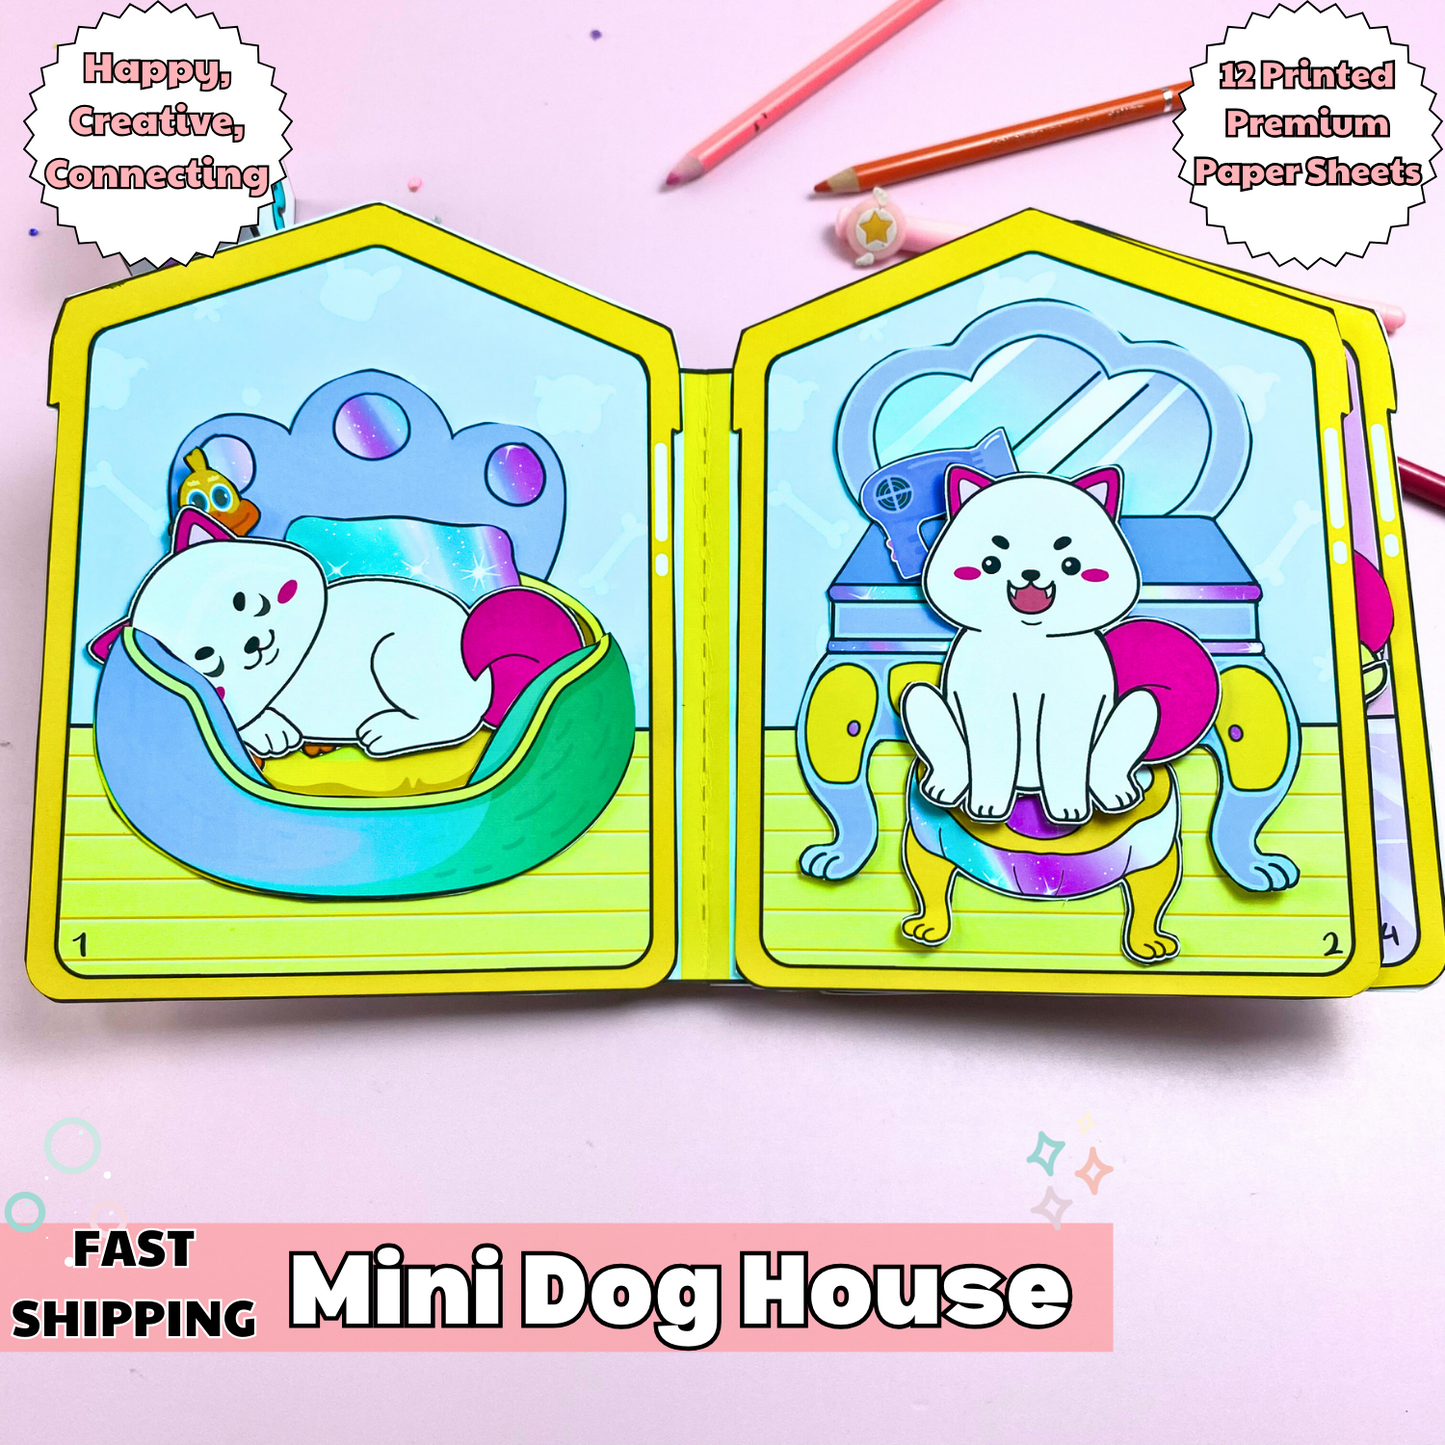 Education Activity Book | Mini Dog House, Creative Paper Toy for kid, Unique Birthday Gifts, Family connection, Limit screen time, Boost creativity